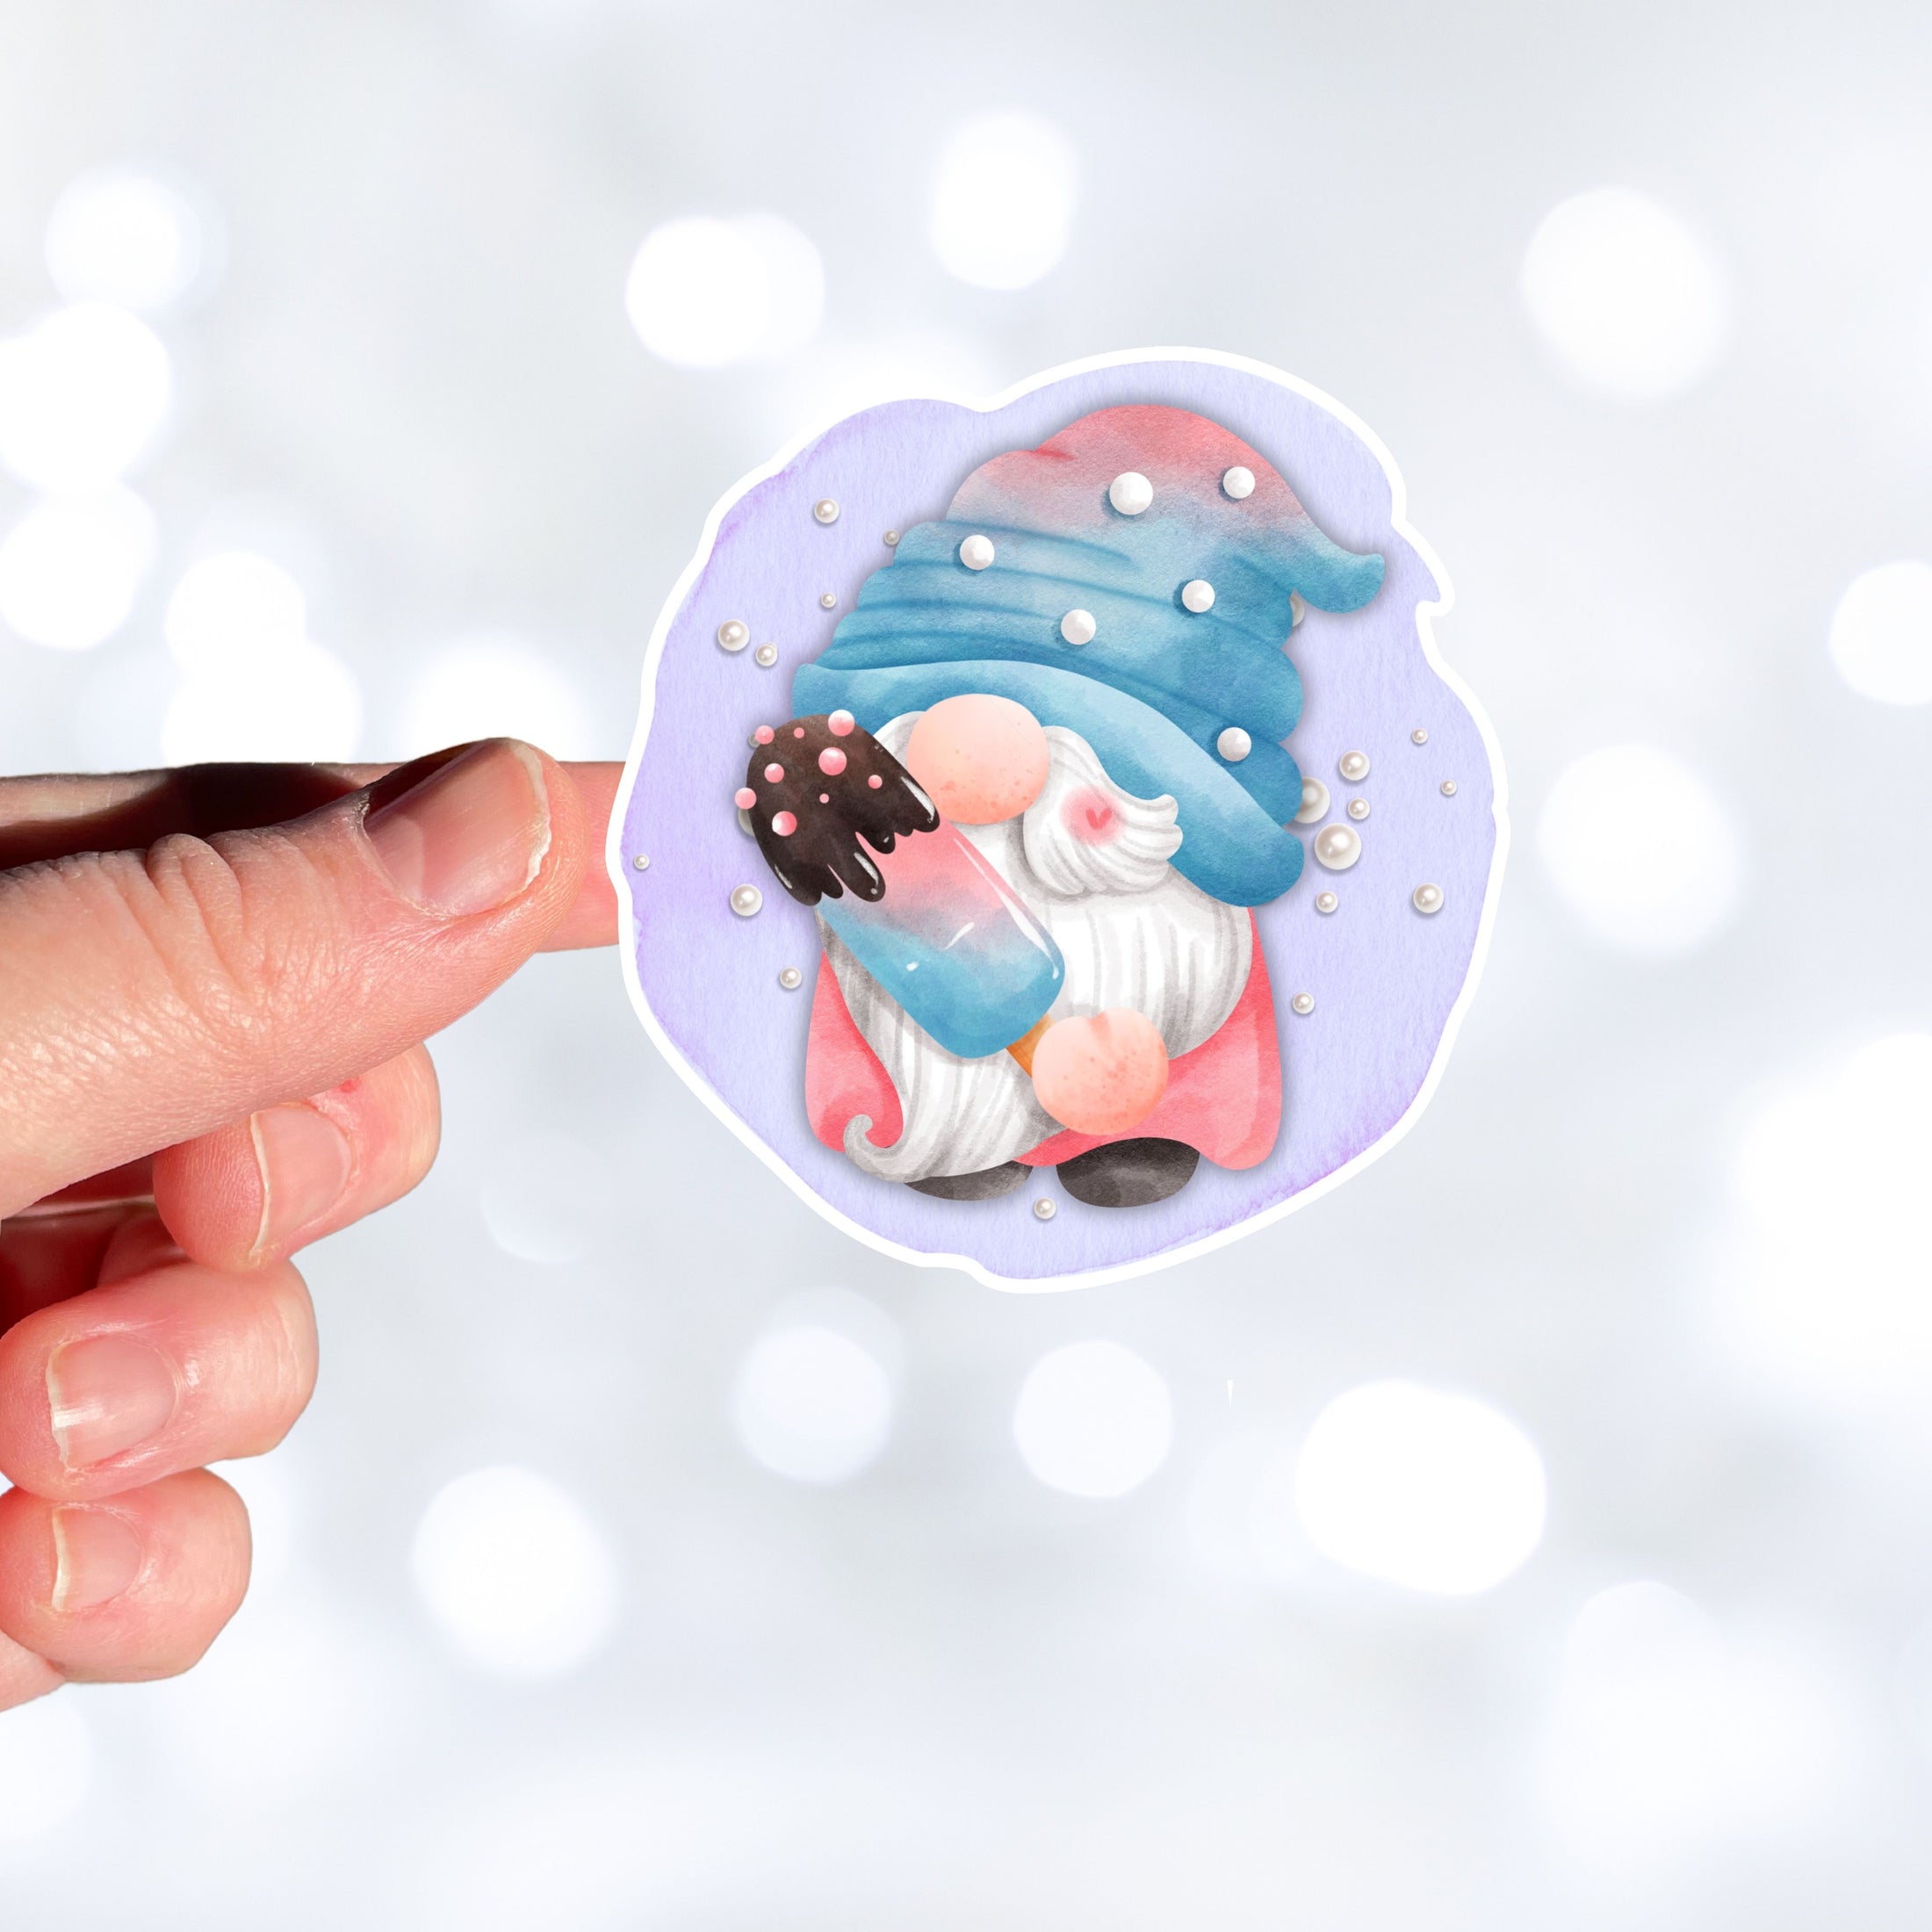 This image shows a hand holding the gnome with a popsicle sticker.